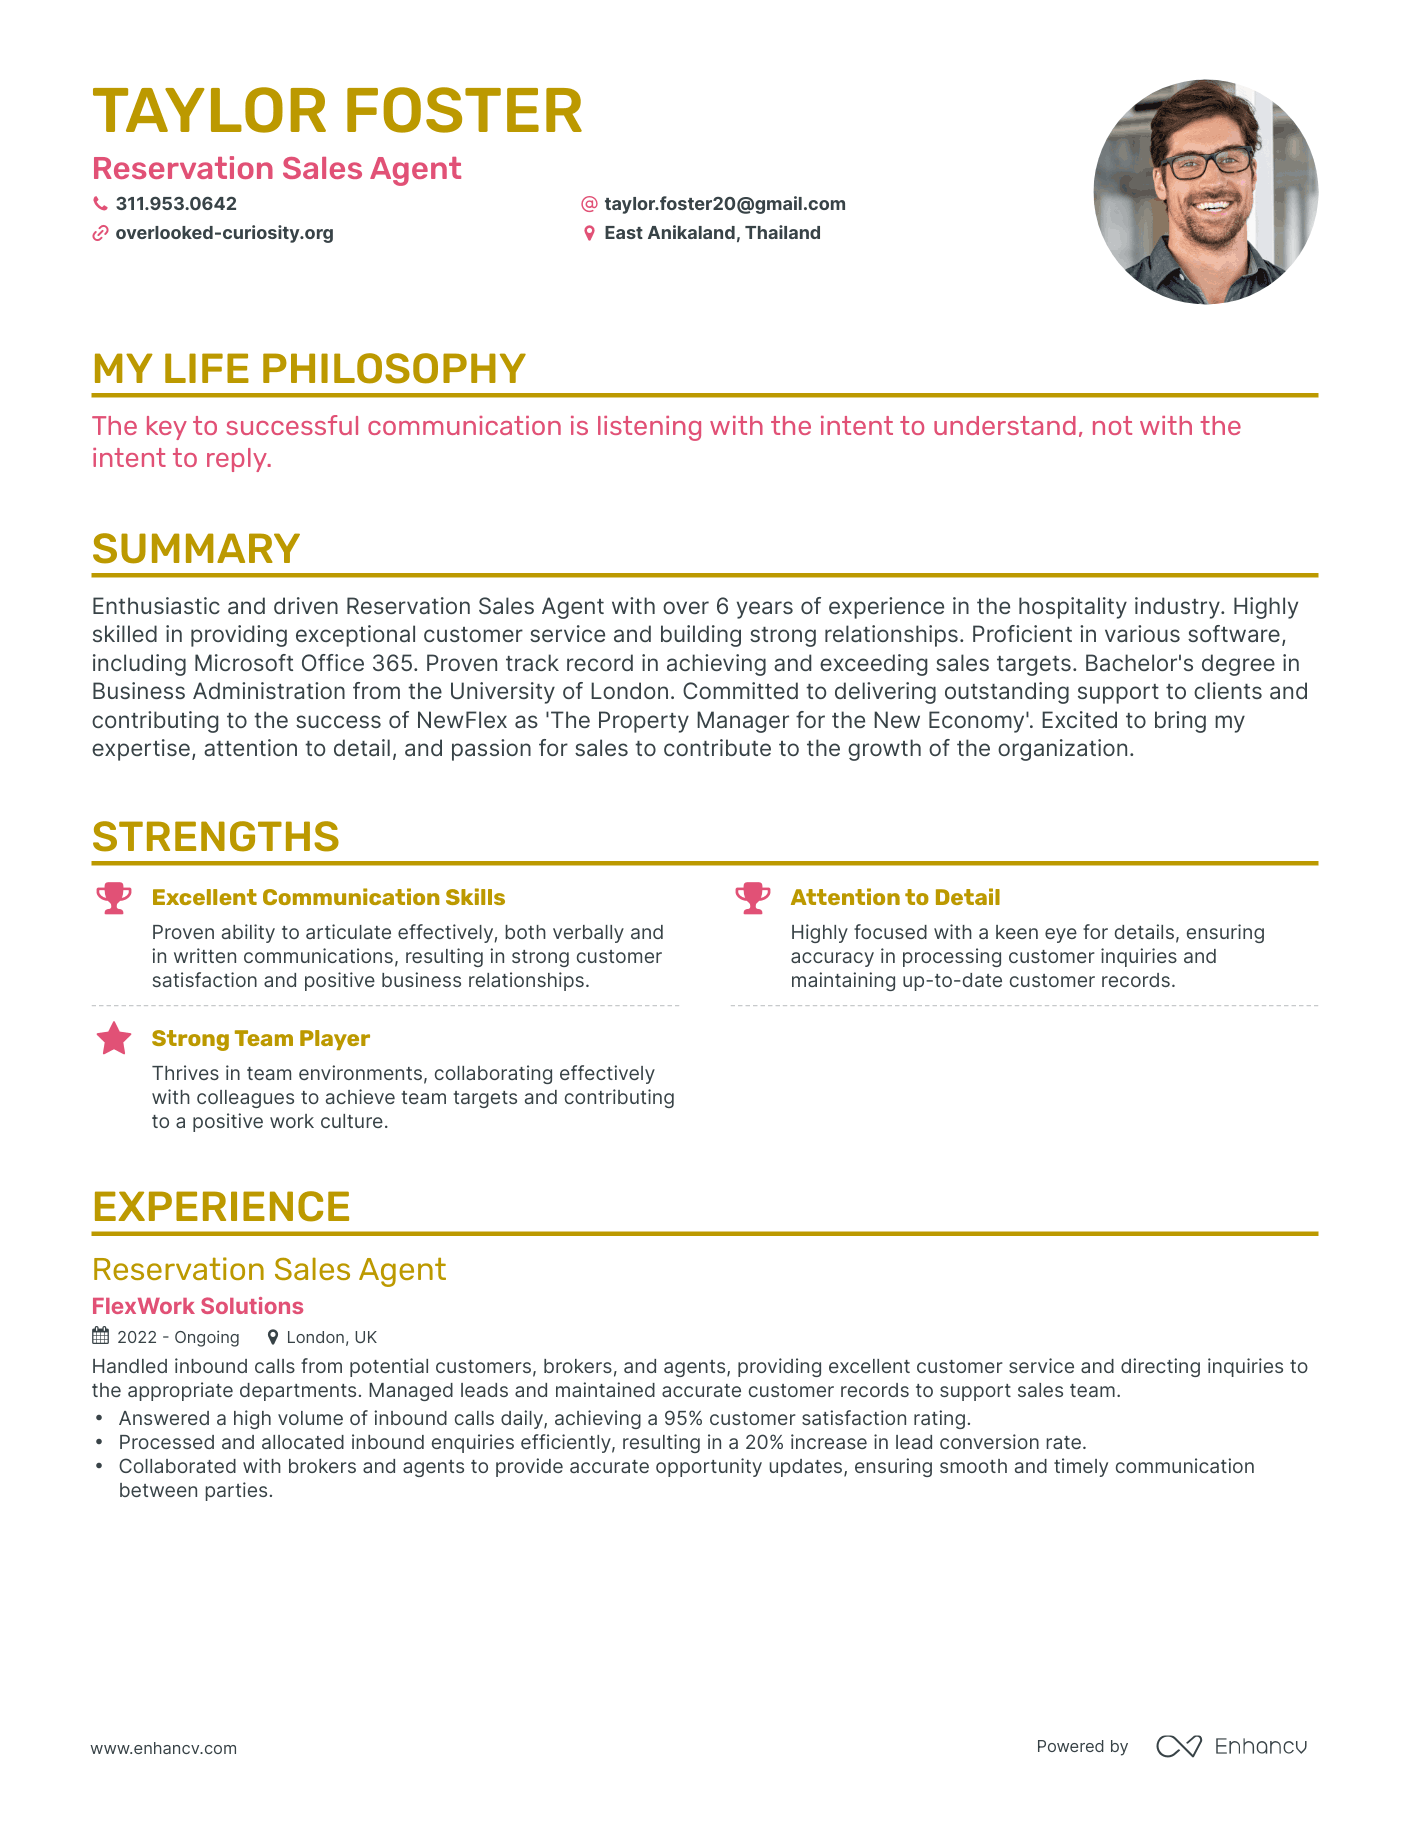 Creative Reservation Sales Agent Resume Example